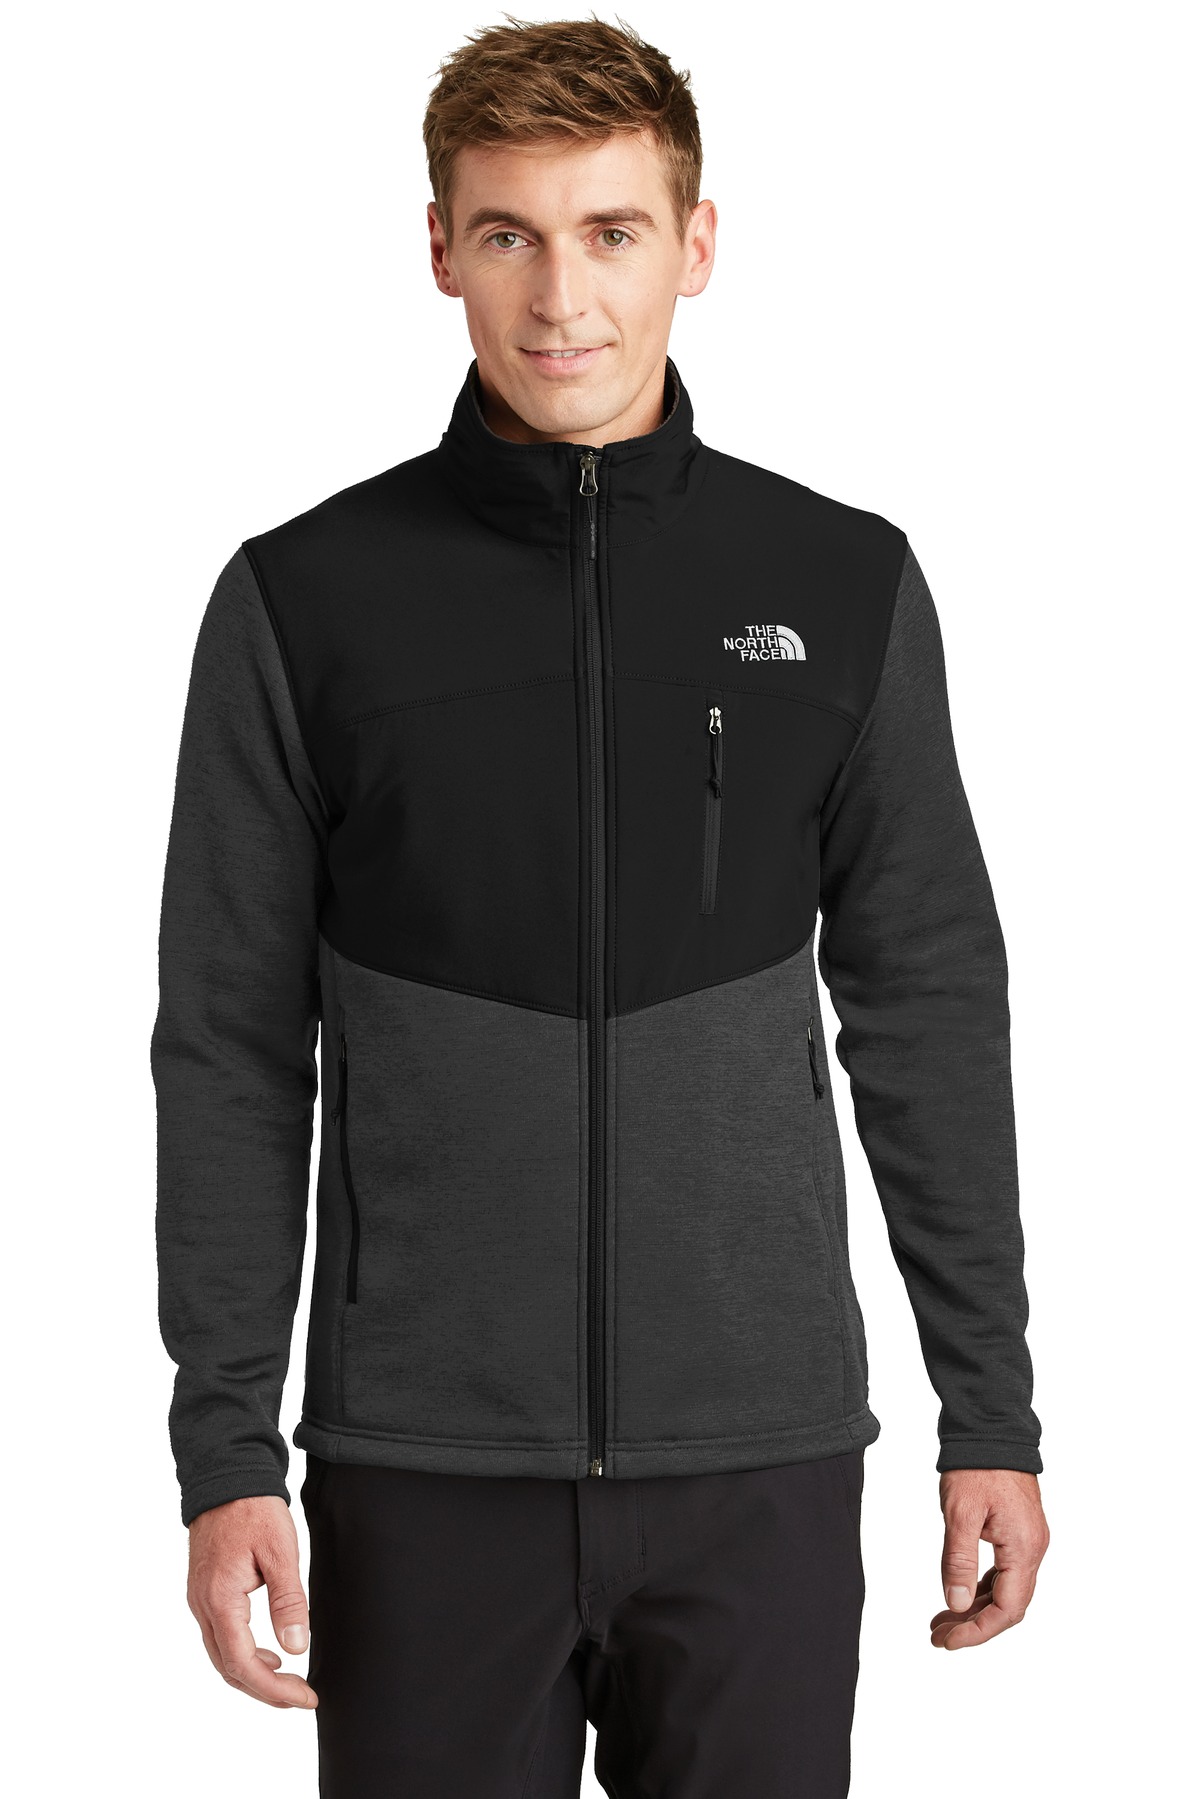 cheapest place to buy north face coats